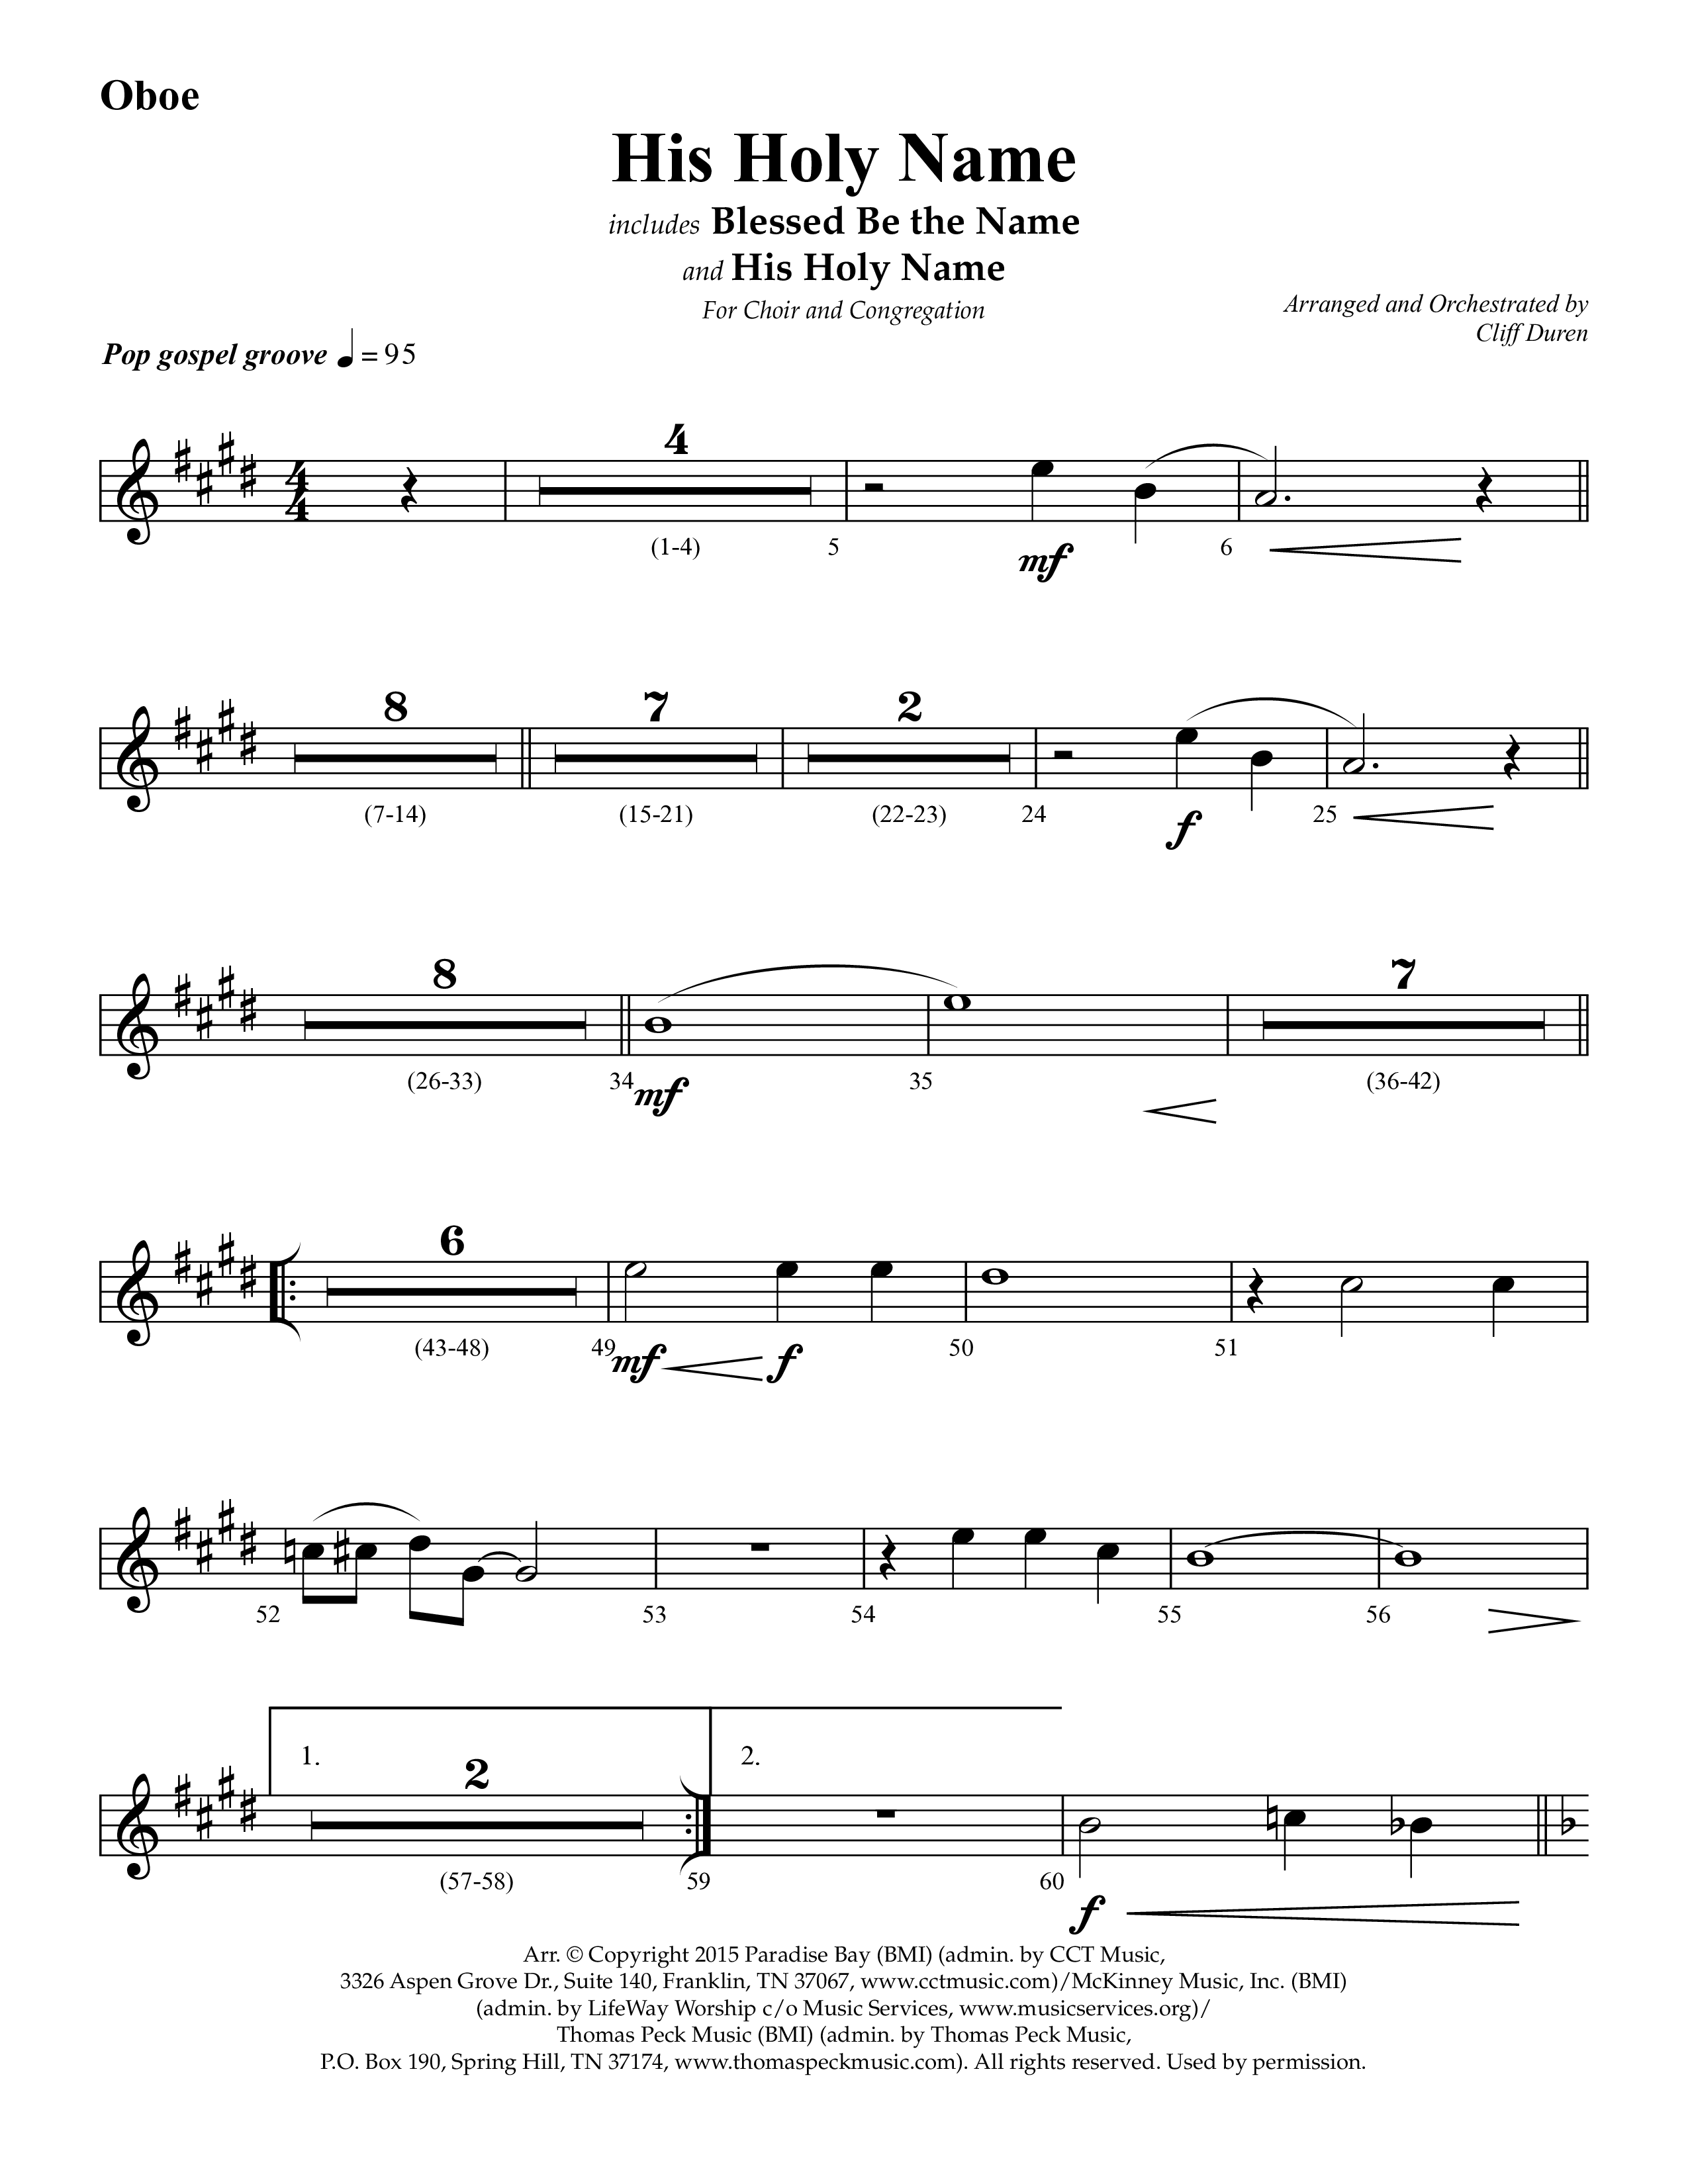 His Holy Name (with Blessed Be The Name) (Choral Anthem SATB) Oboe (Lifeway Choral / Arr. Cliff Duren)